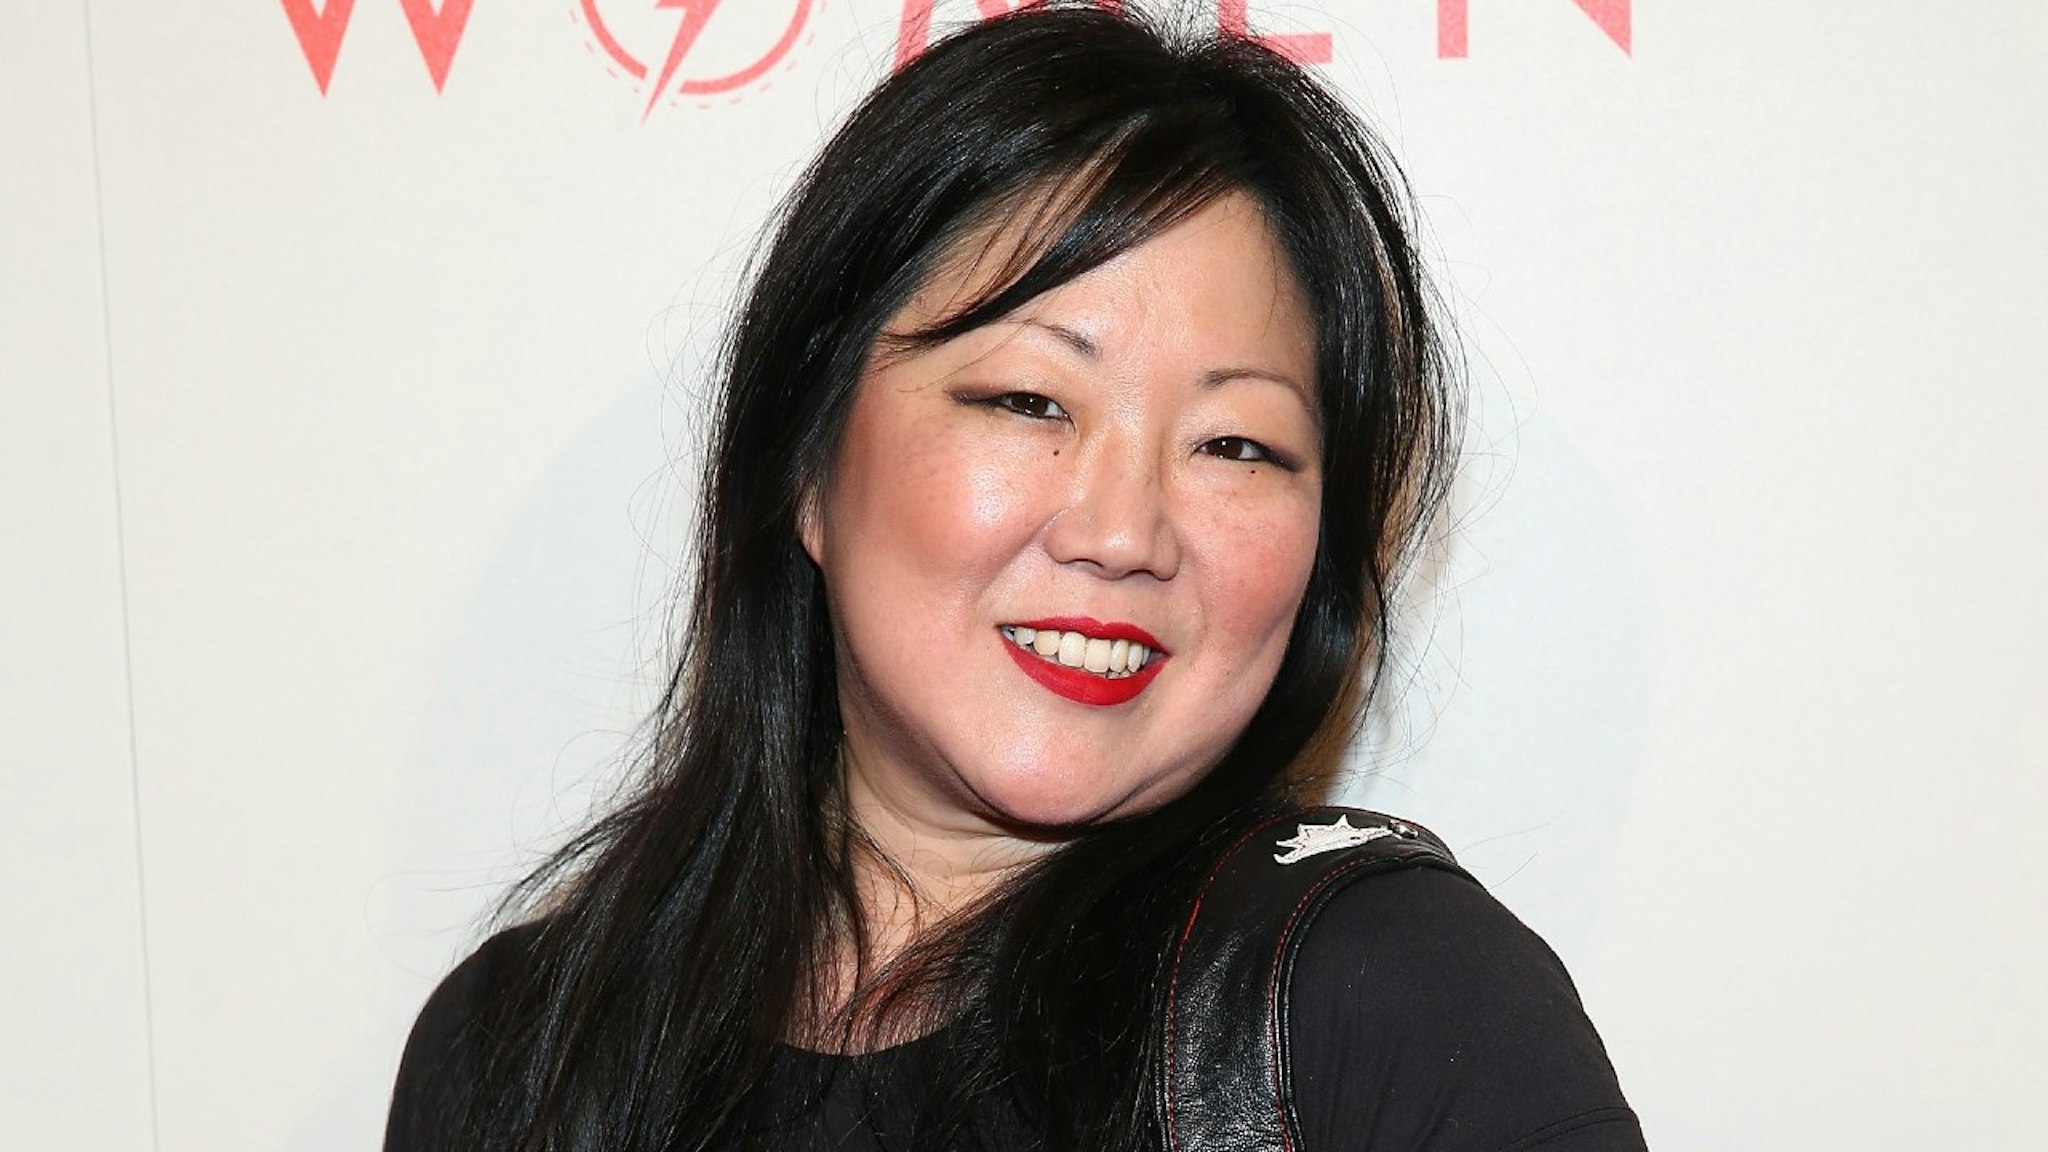 Actress Margaret Cho attends The L.A. Gay & Lesbian Center's 2014 An Evening With Women (AEWW) at The Beverly Hilton Hotel on May 10, 2014 in Beverly Hills, California.